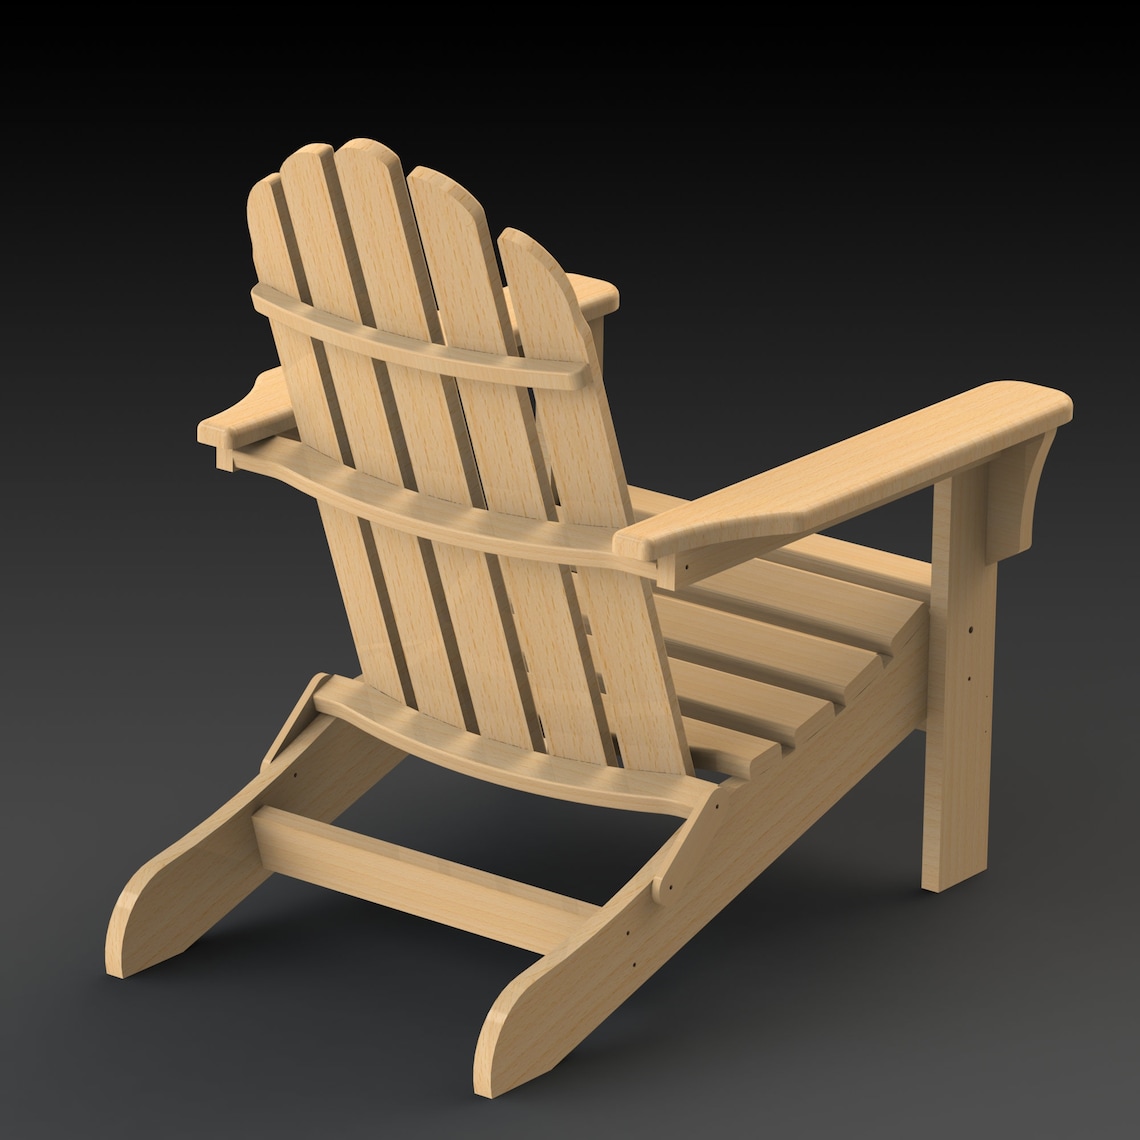 Folding Adirondack Chair Plans in PDF and DXF format. US 